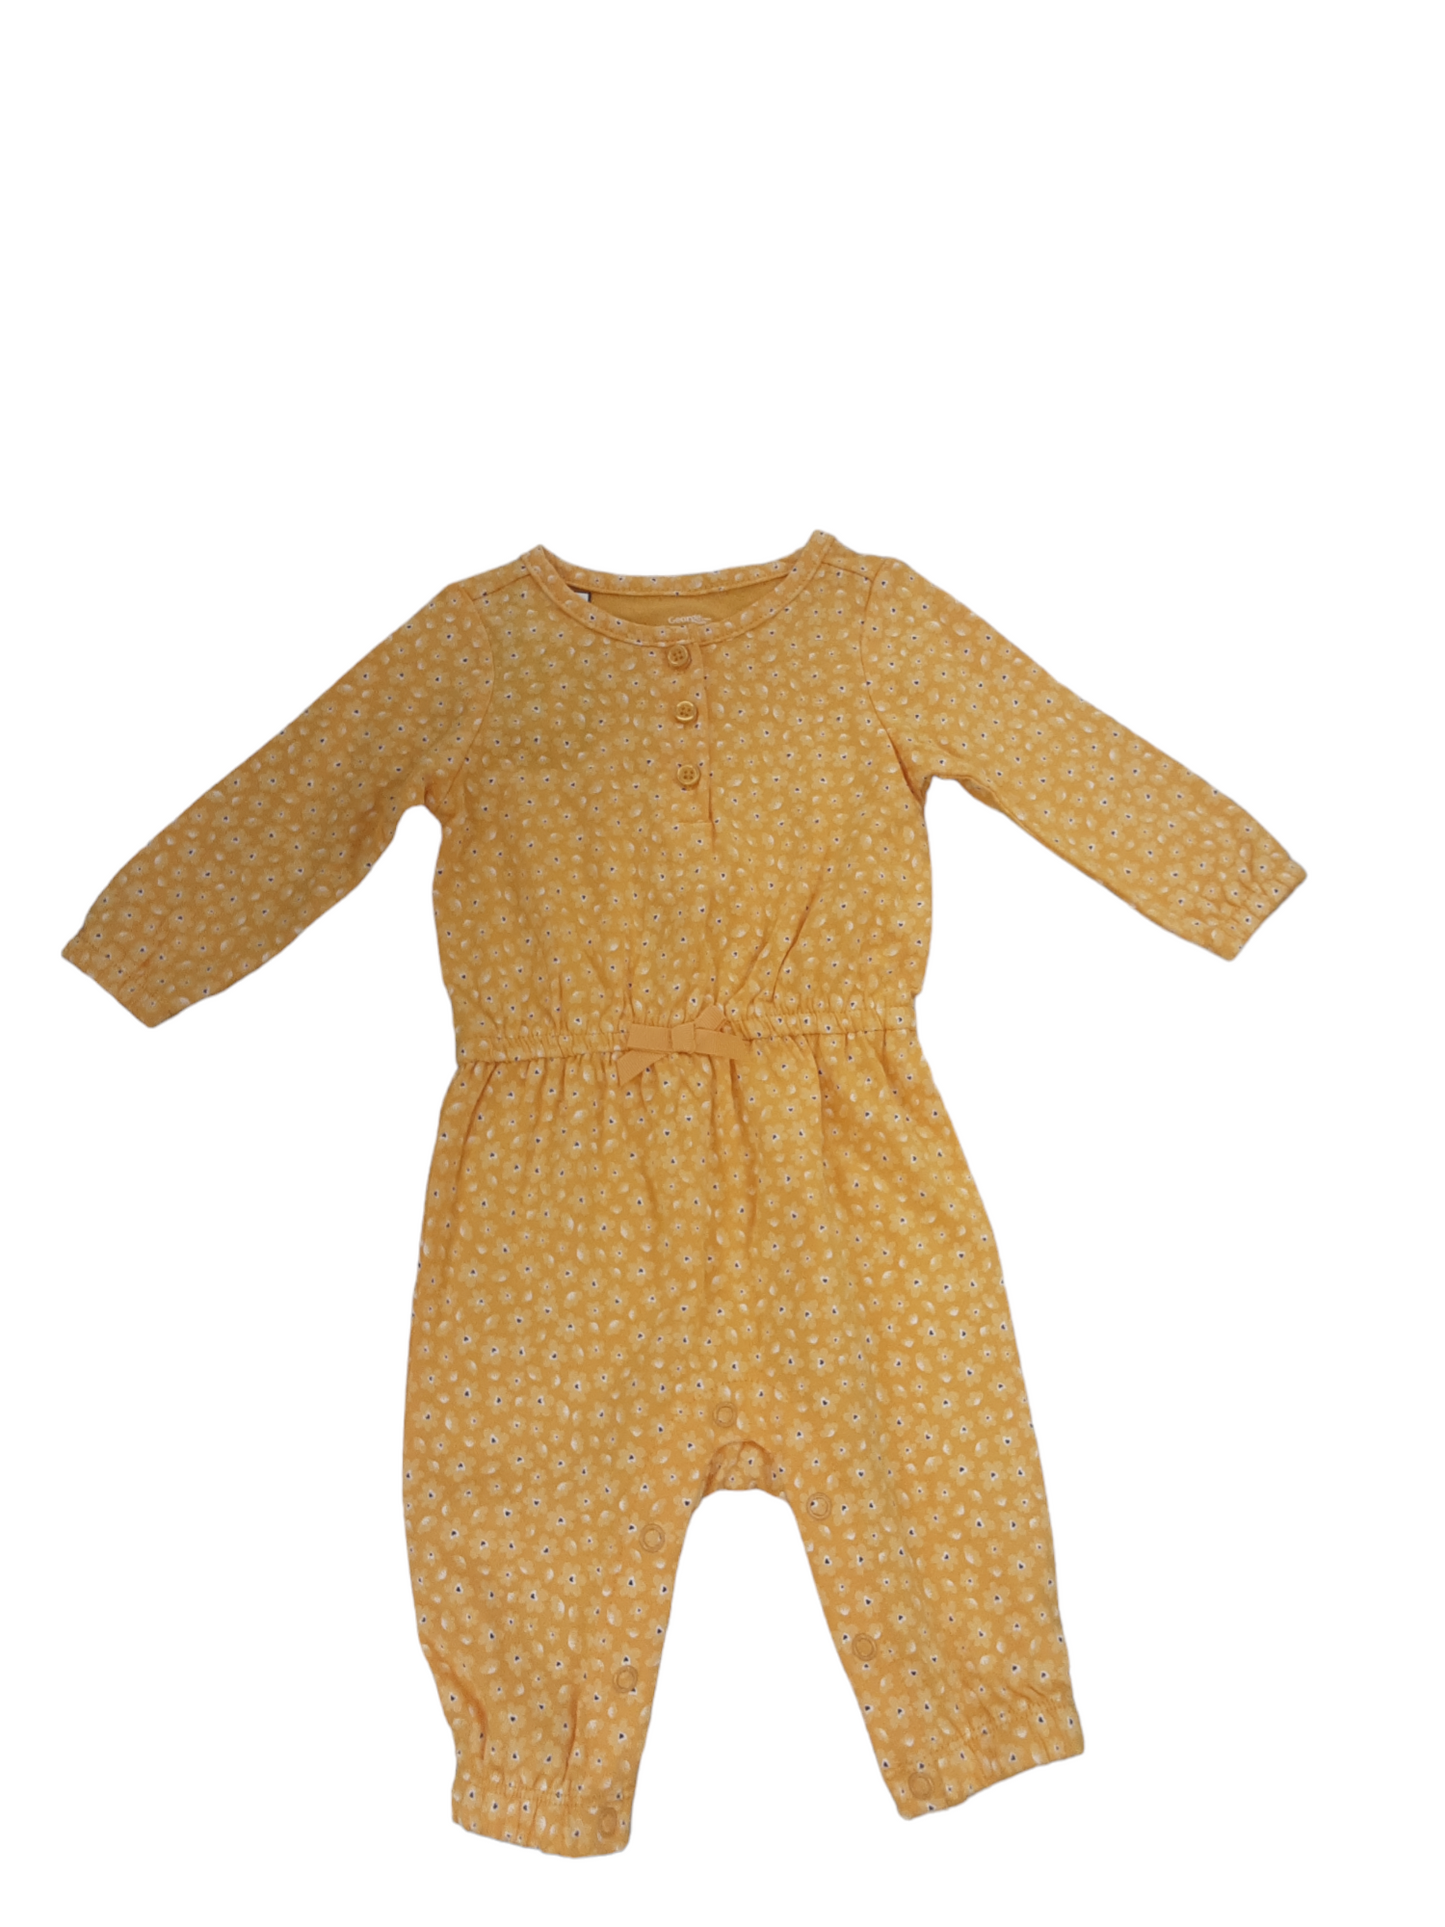 3 to 6 month bright yellow jumpsuit